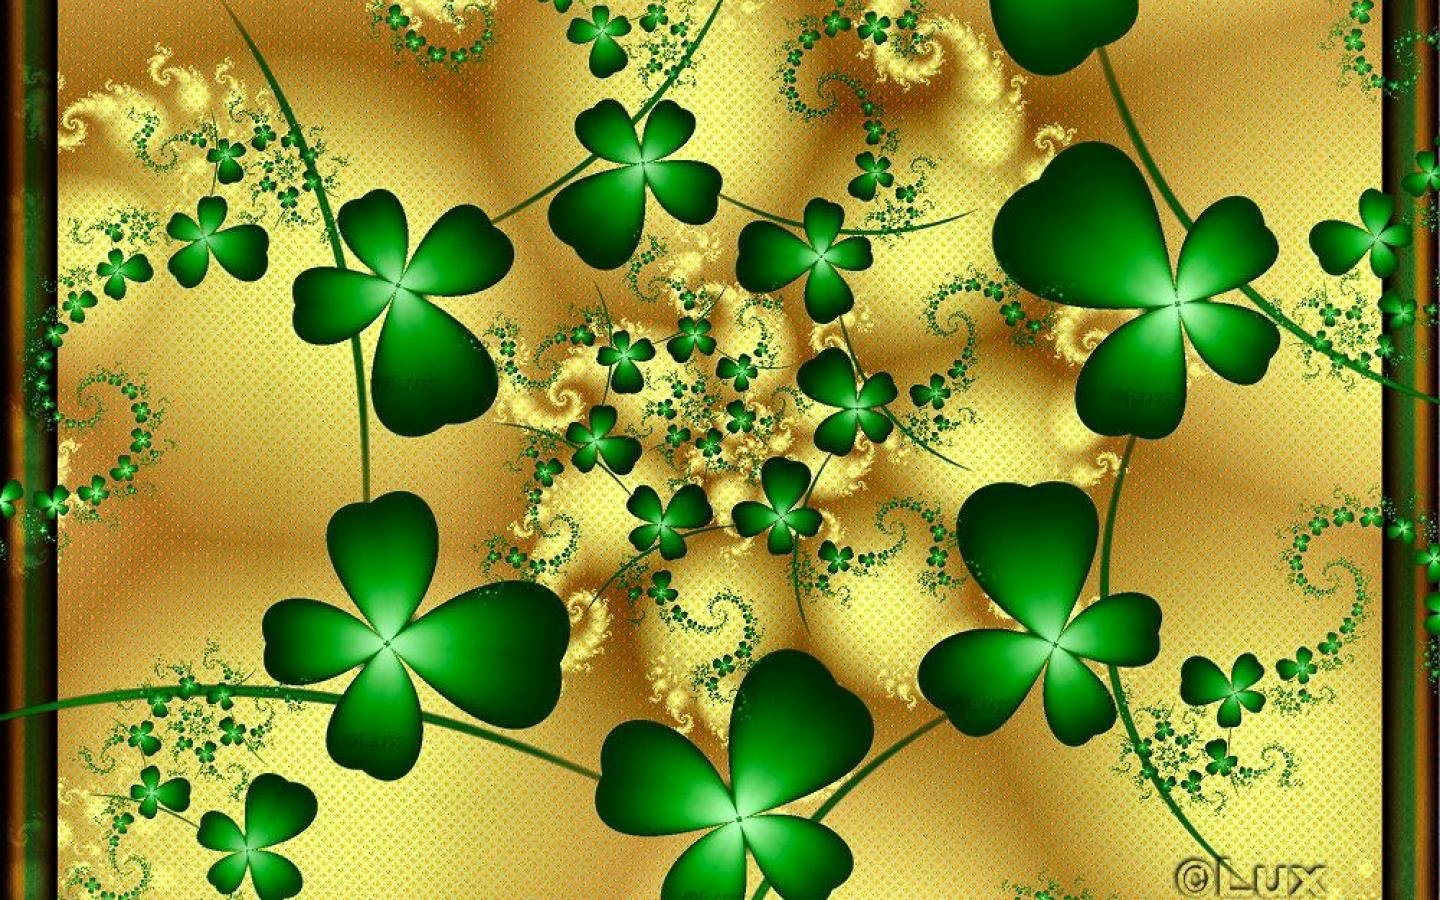 Green and Gold Four Leaf Clover Nail Design - wide 3